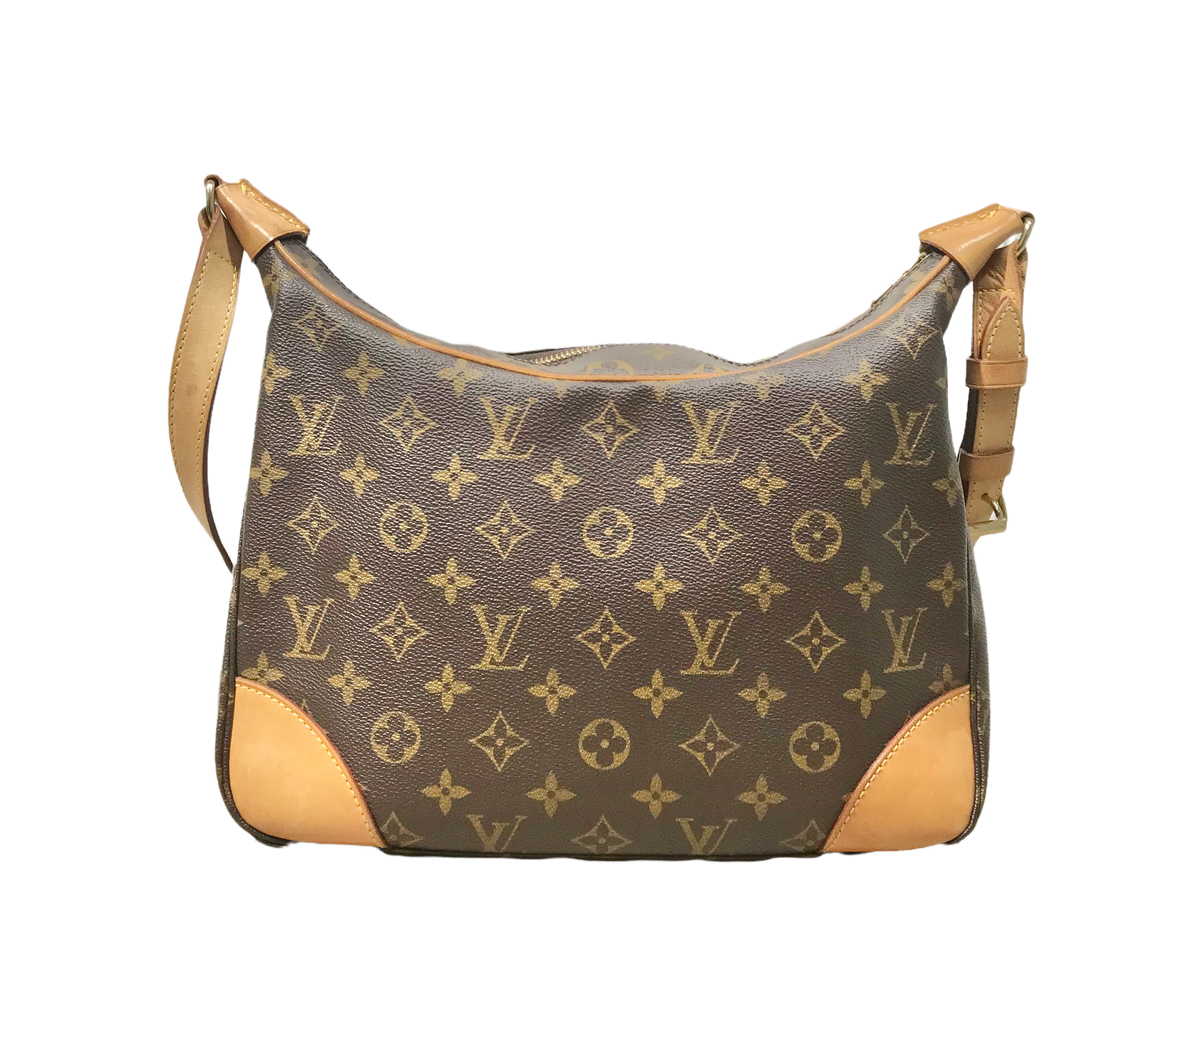 Products by Louis Vuitton: Boulogne Bag